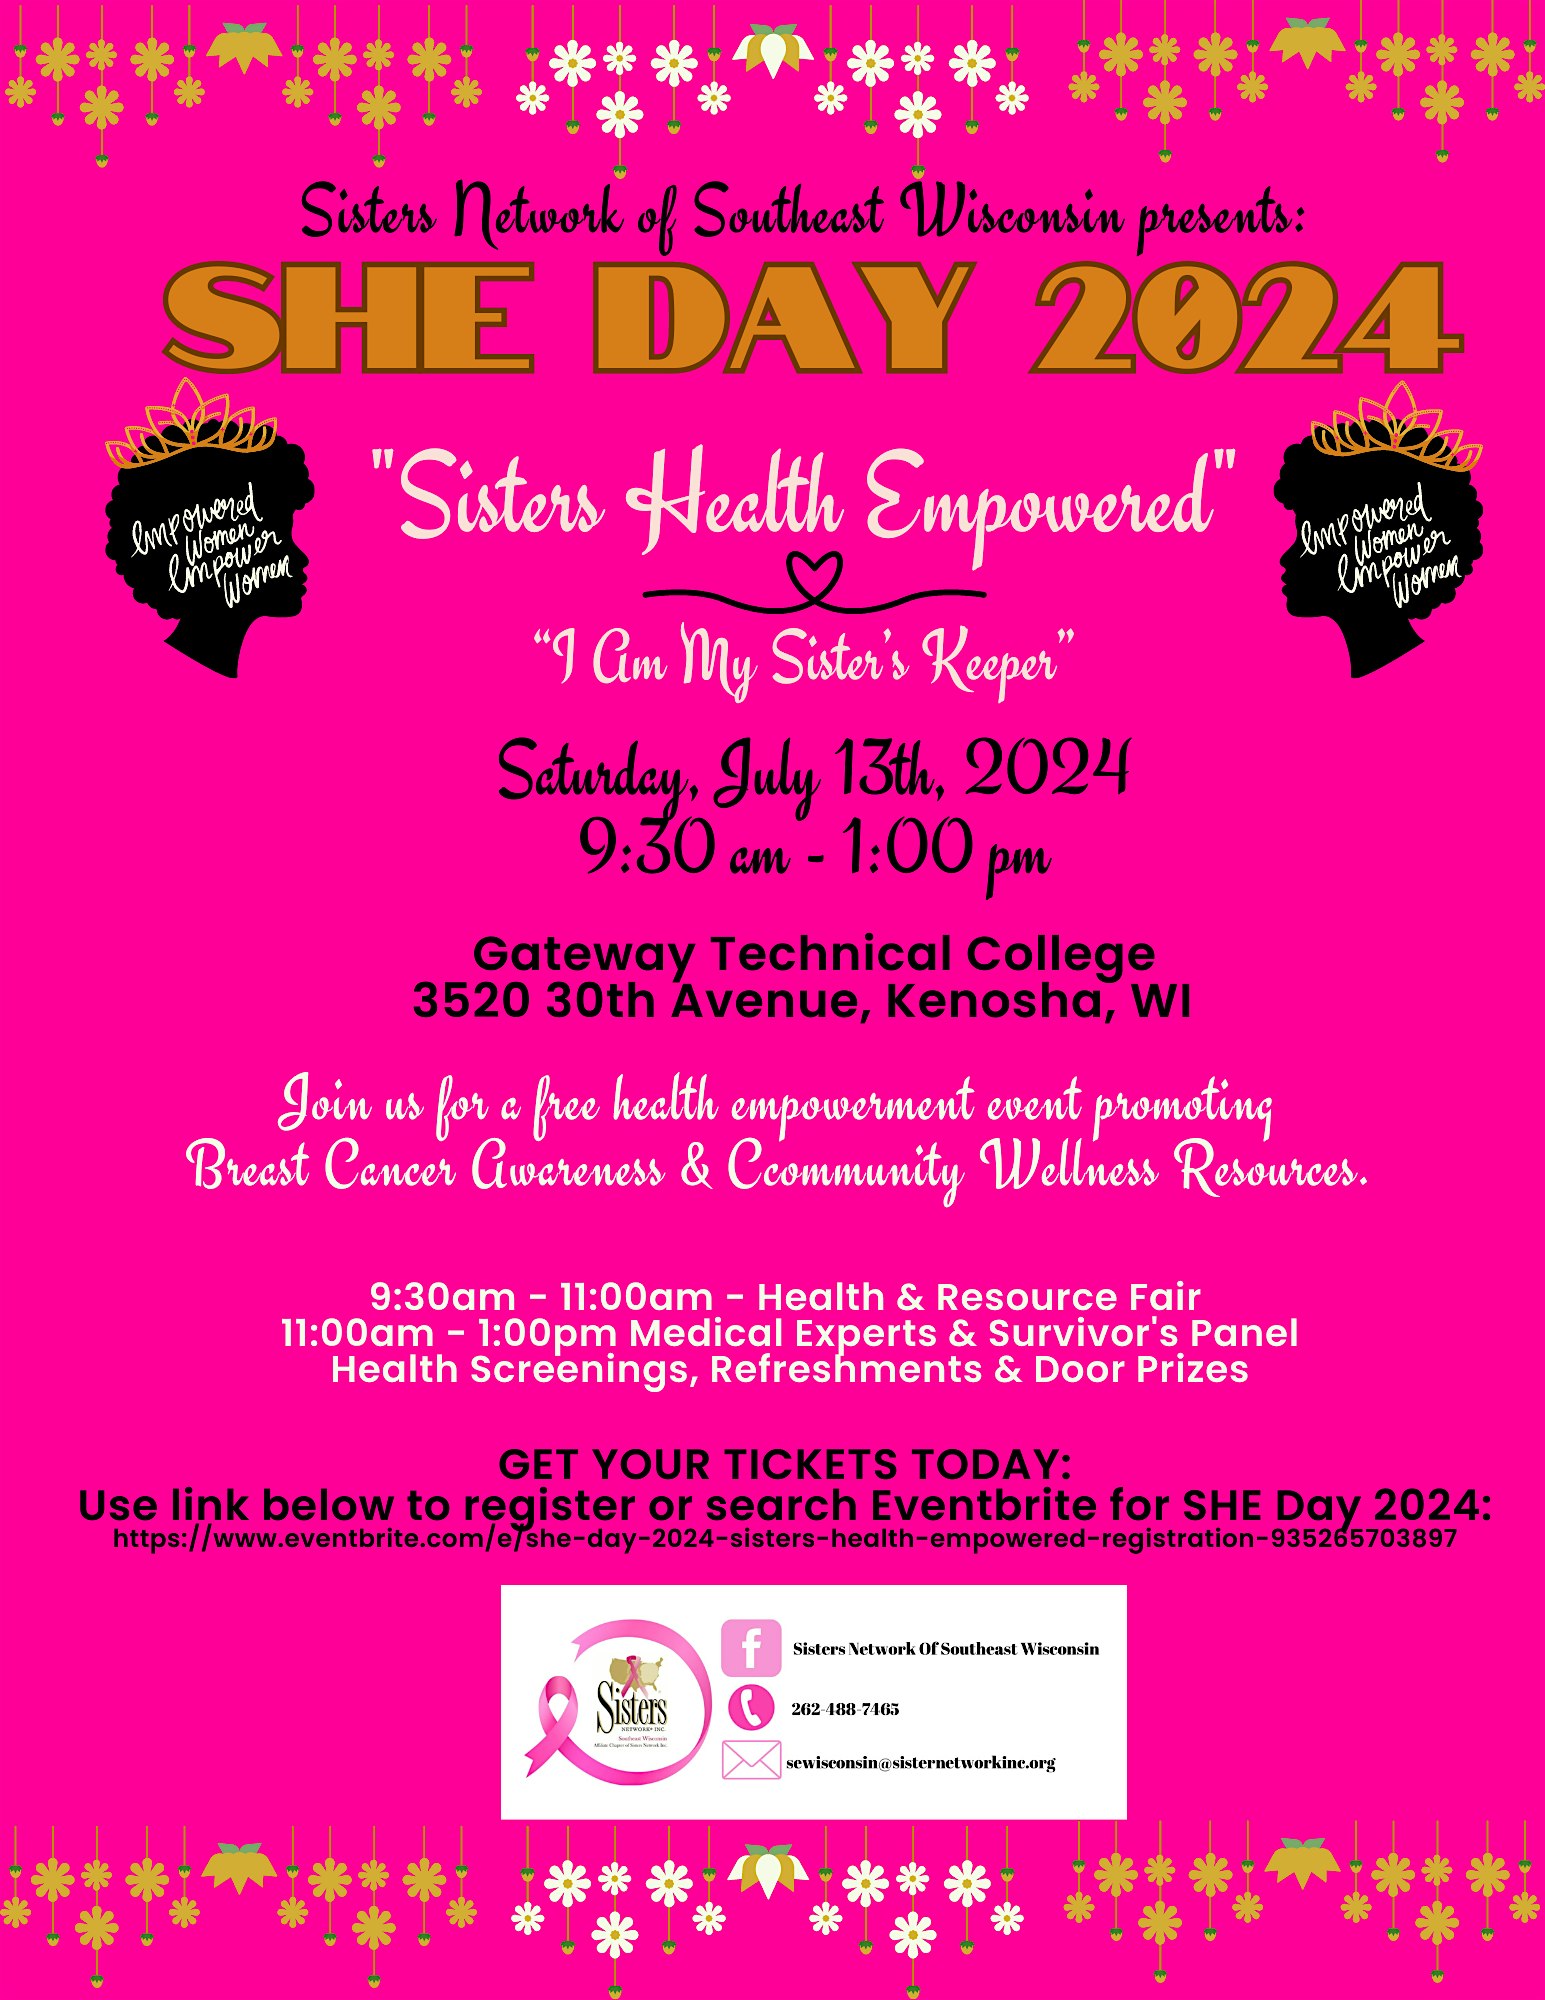 SHE Day 2024 - "Sisters Health Empowered"